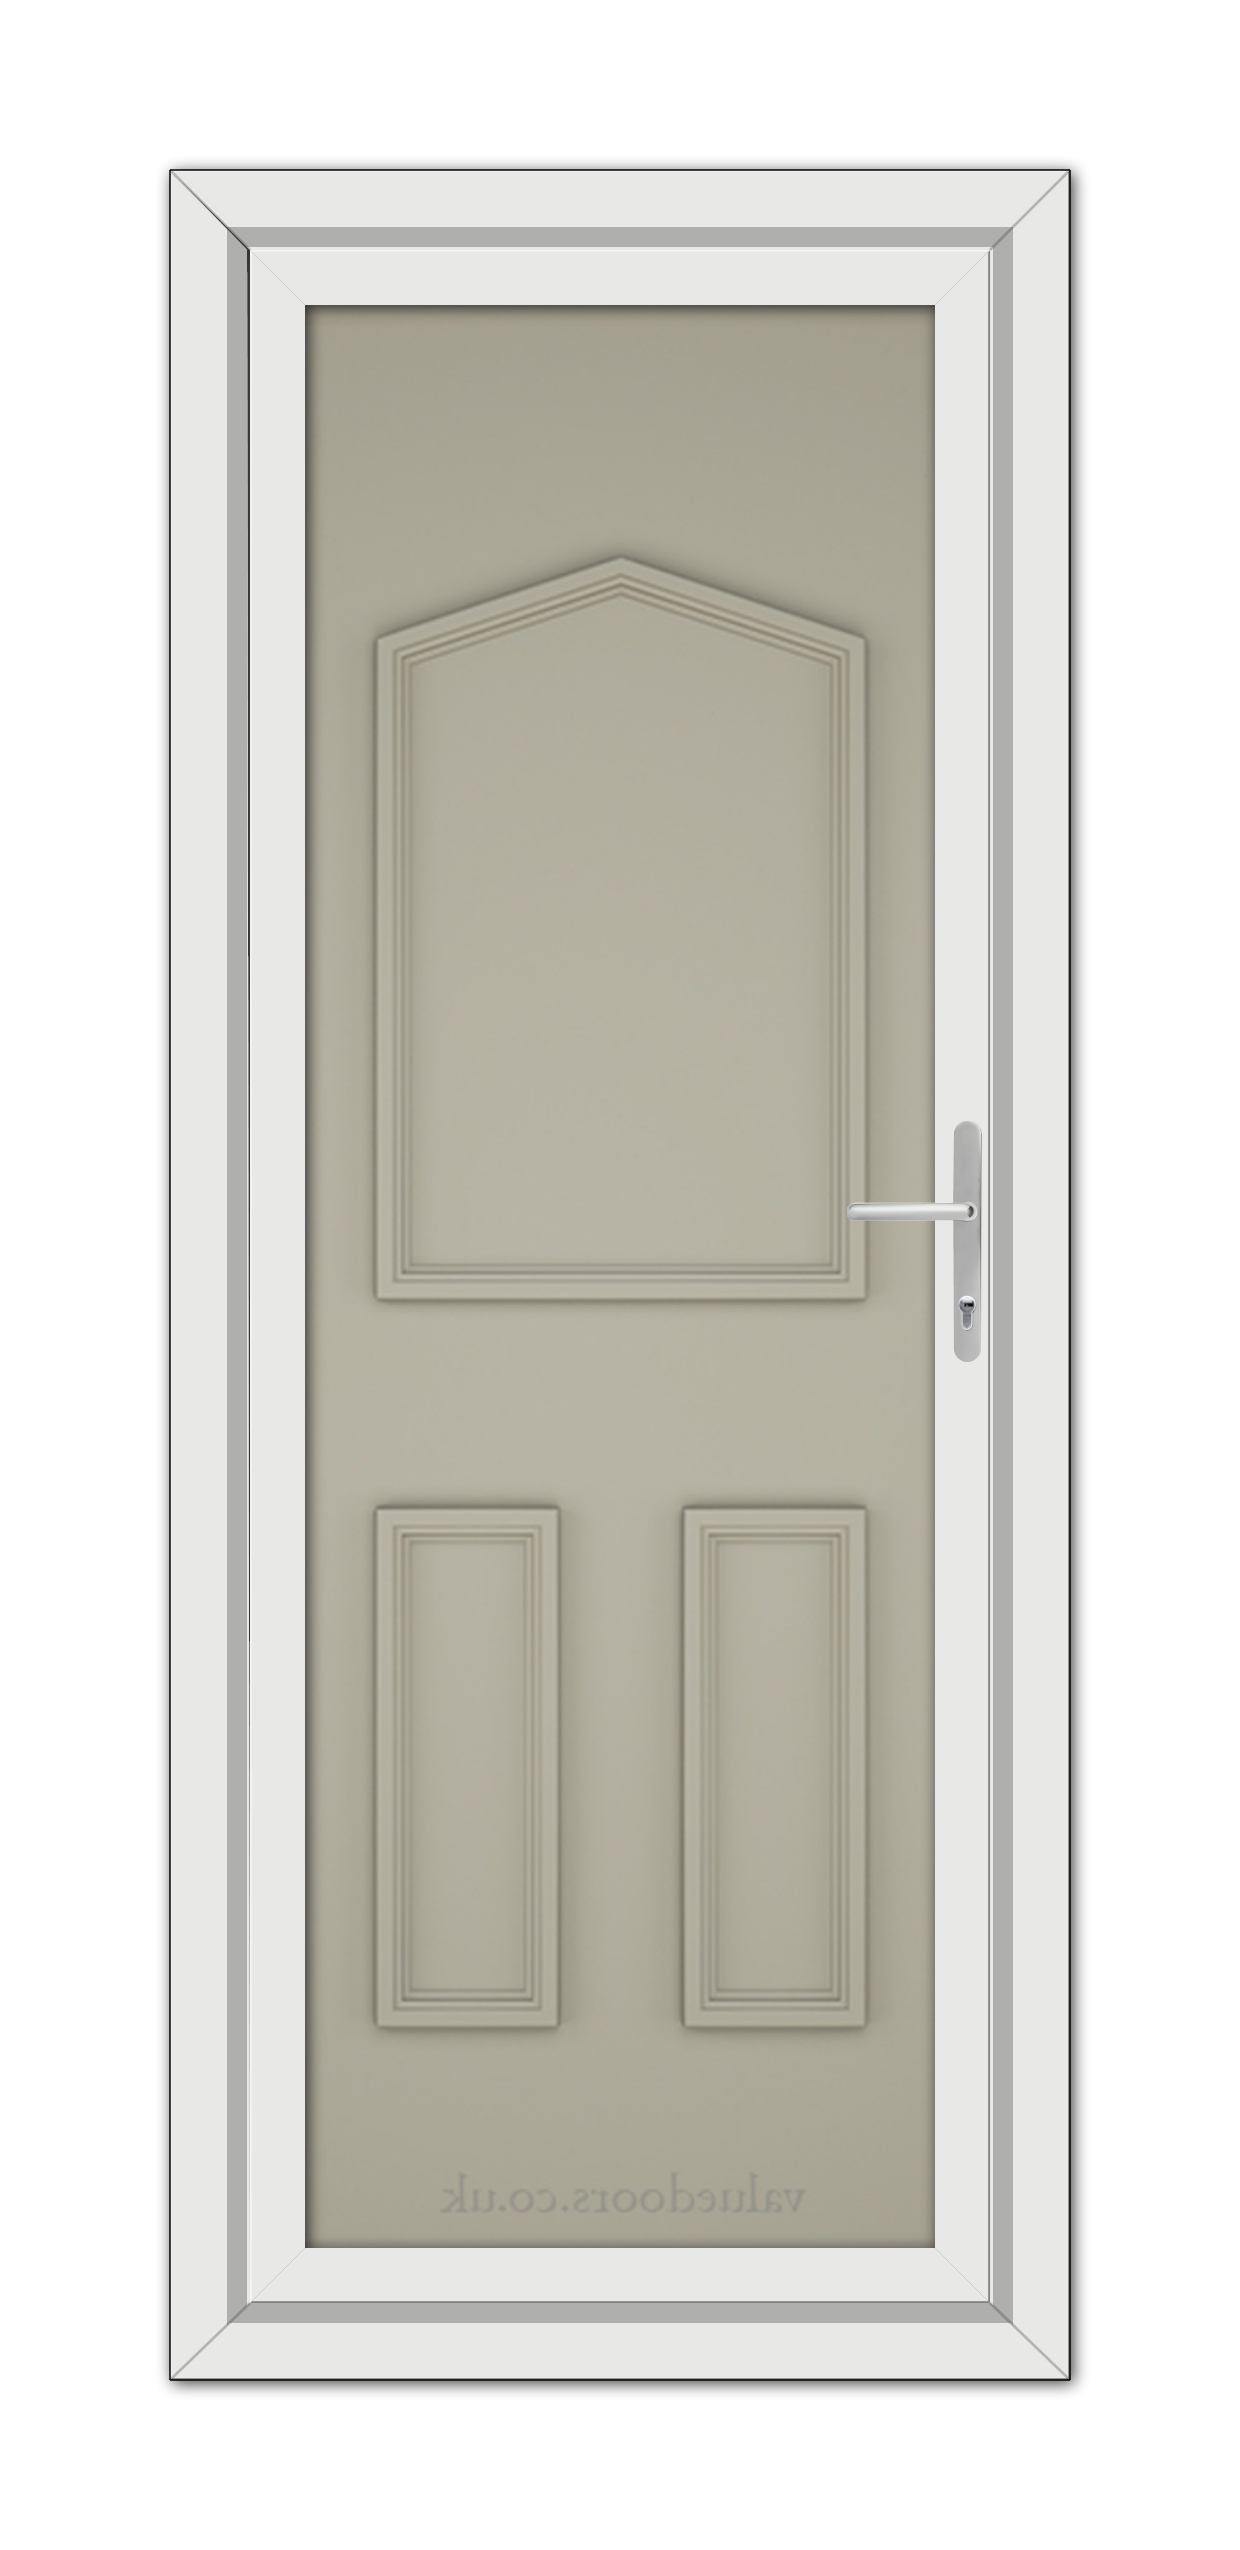 A vertical image of a closed, modern pebble grey Oxford solid uPVC door with a metallic handle, set within a white frame.